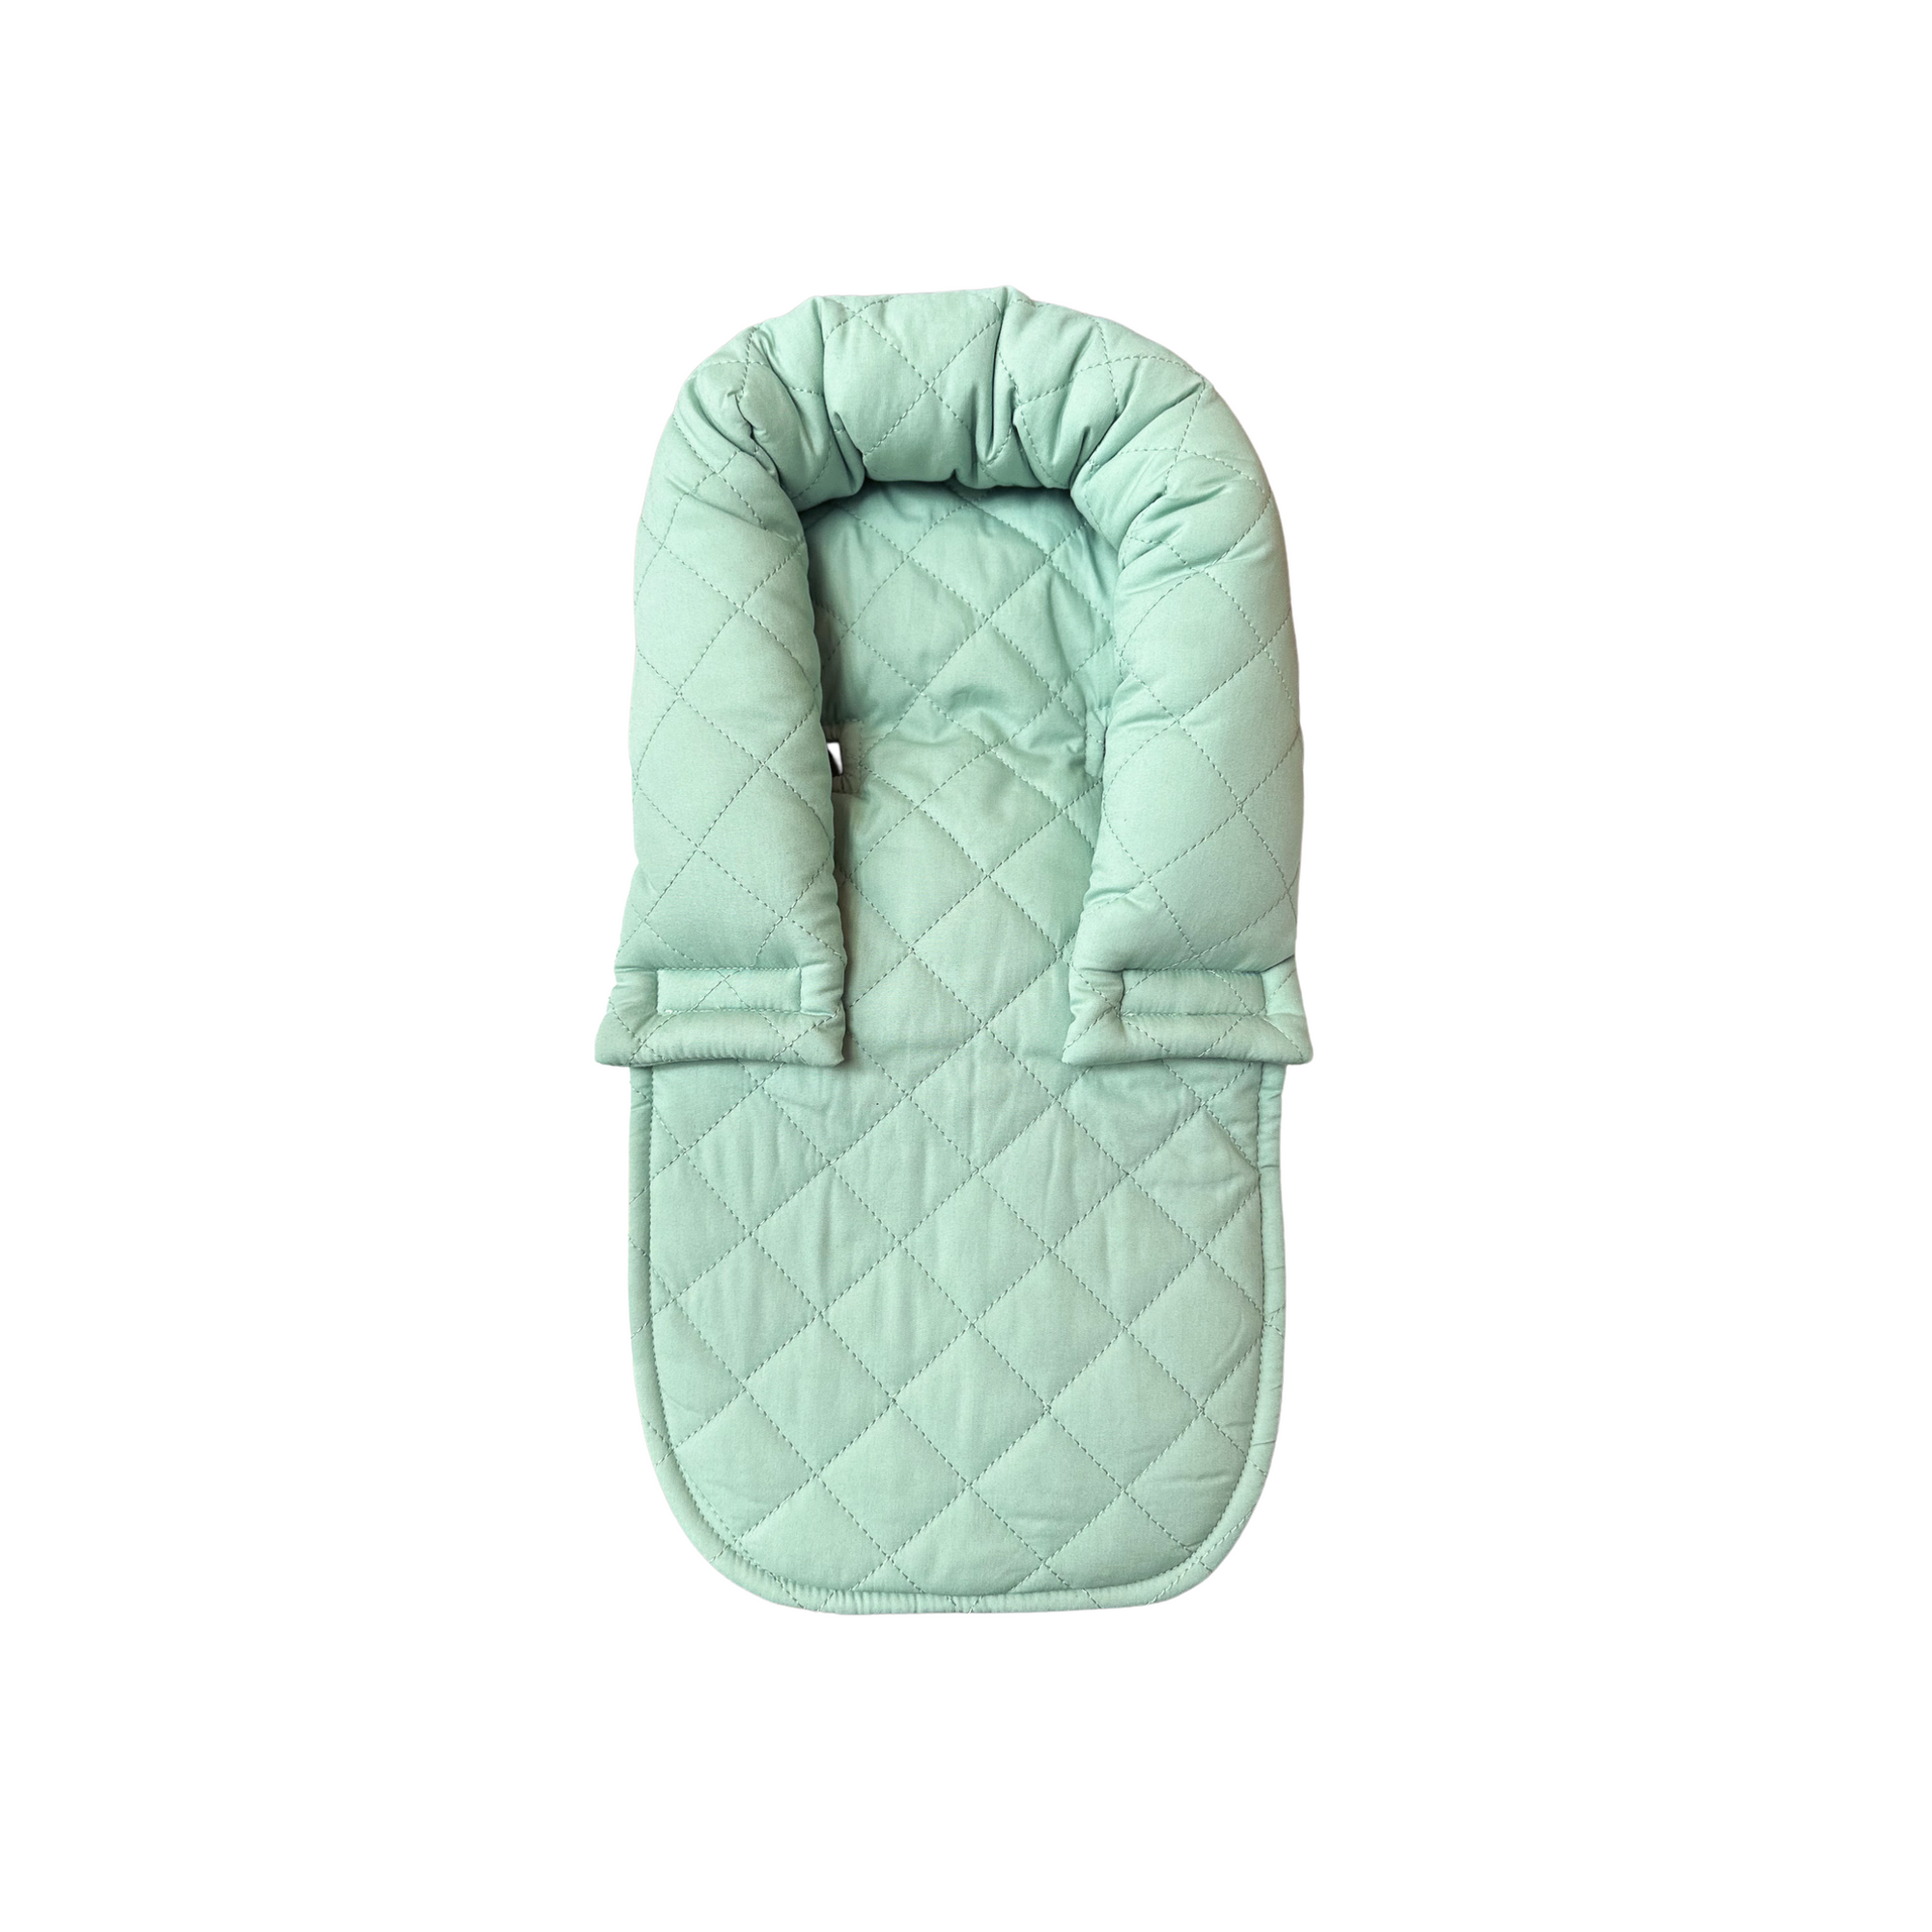 Infant Head Support Quilted | Seafoam